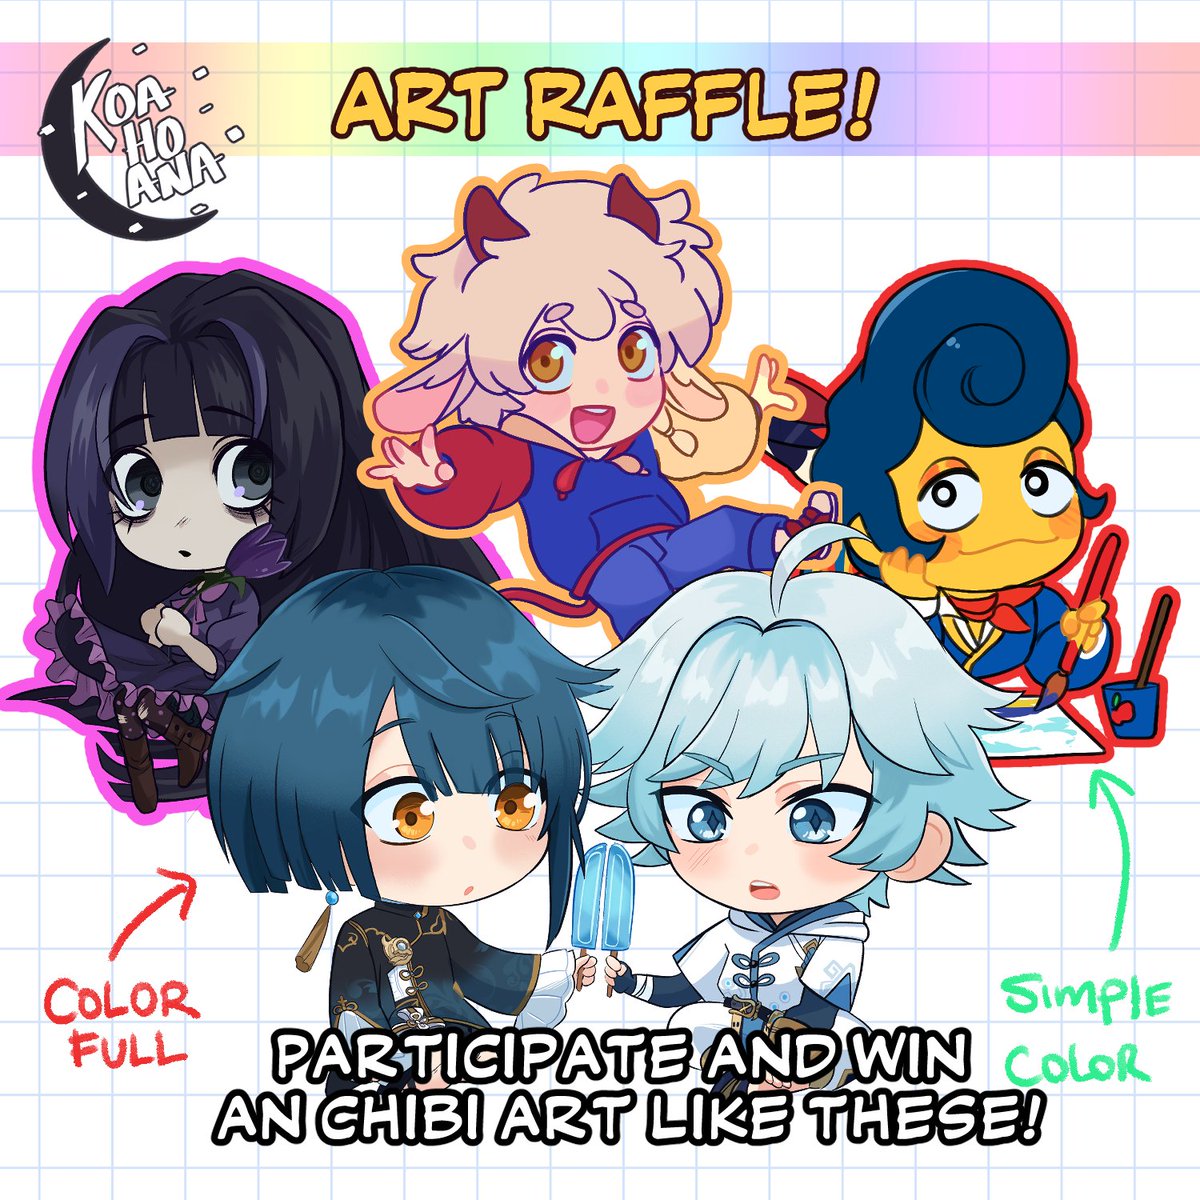 🎨ART RAFFLE !! 🎨 ART GIVEAWAY. 📣I organize this raffle in order to raise funds for my mom's operation. I tell you in the thread what happened and how to participate. 

Please share, I will appreciate it very much.🙏

#artraffle #helpartist